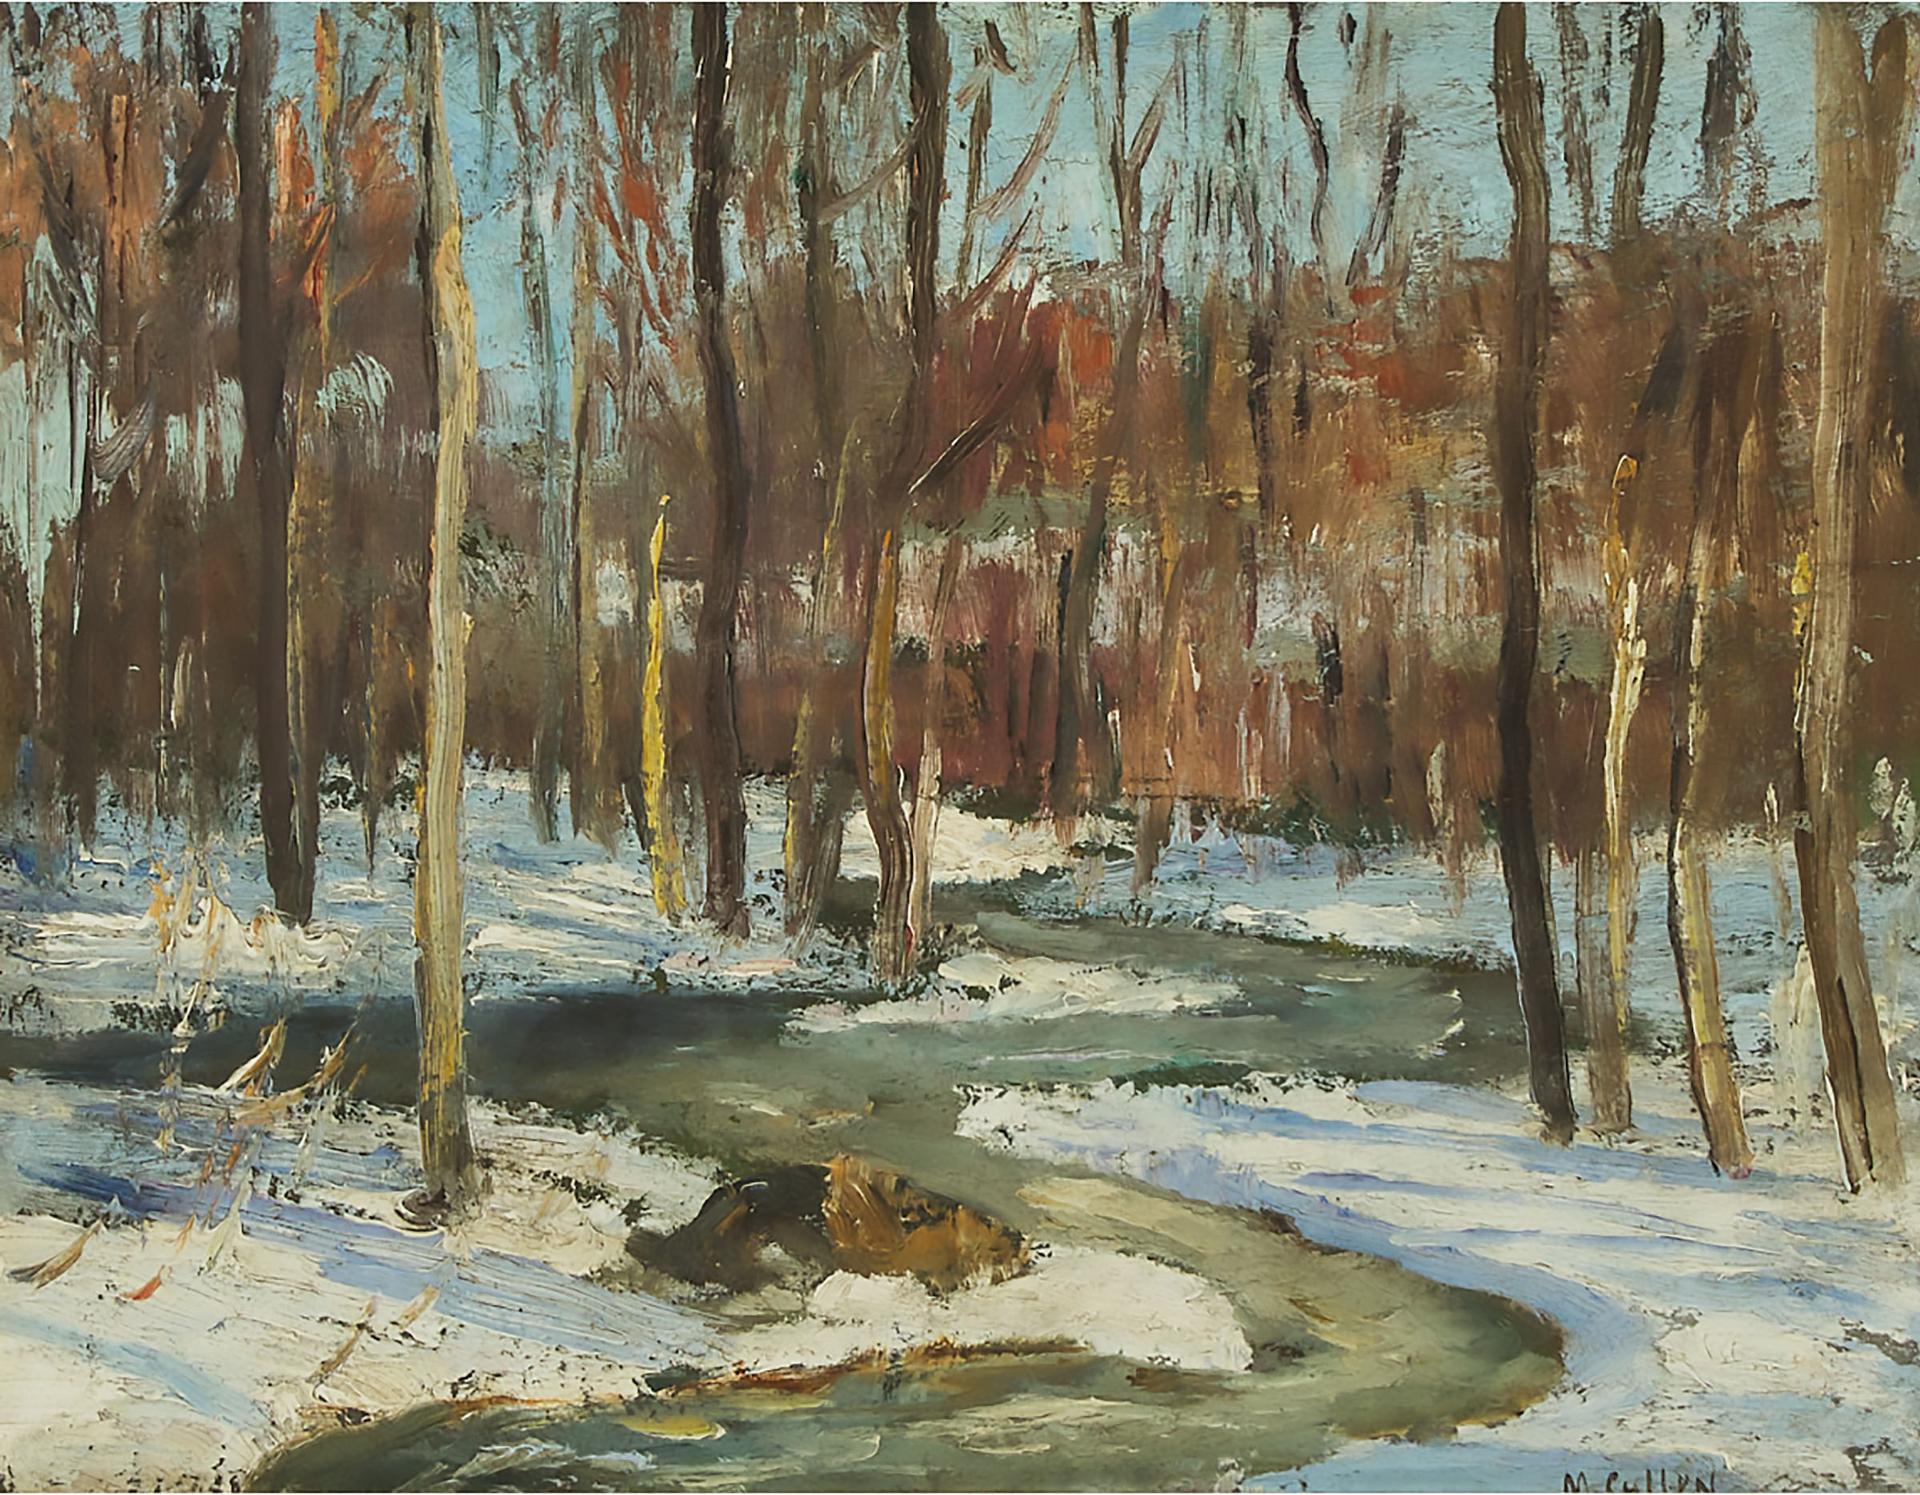 Maurice Galbraith Cullen (1866-1934) - River In The Woods, Winter